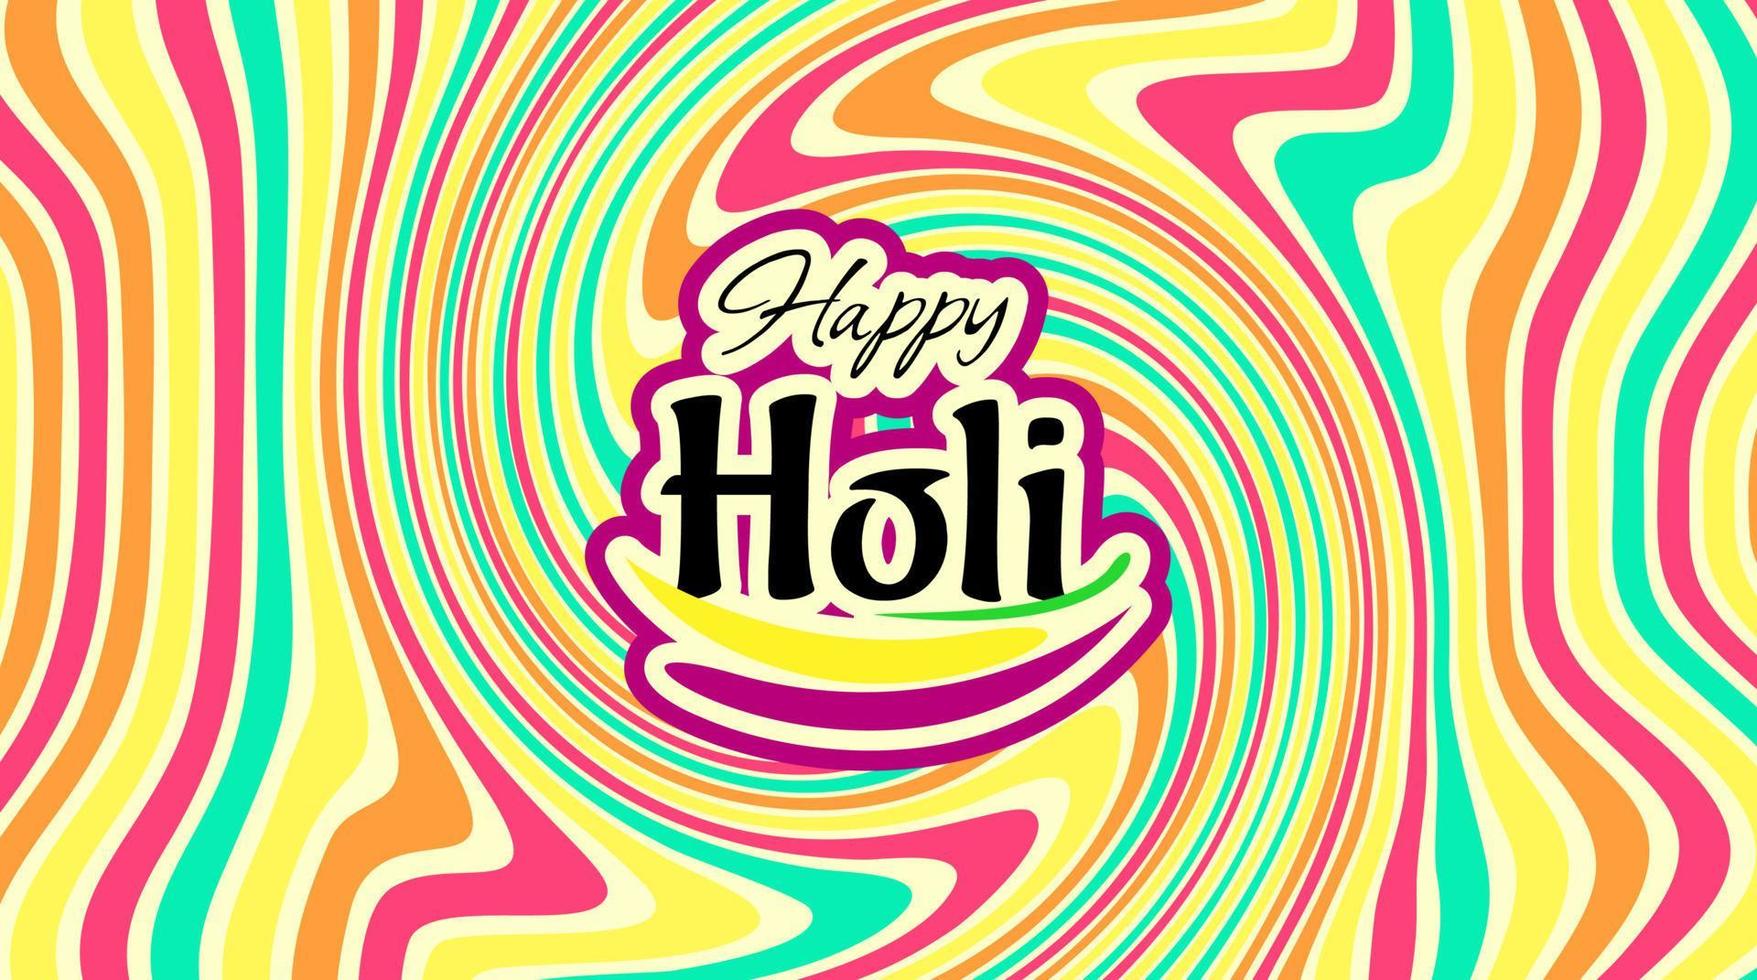 abstract colorful hindi holi festival background design vector